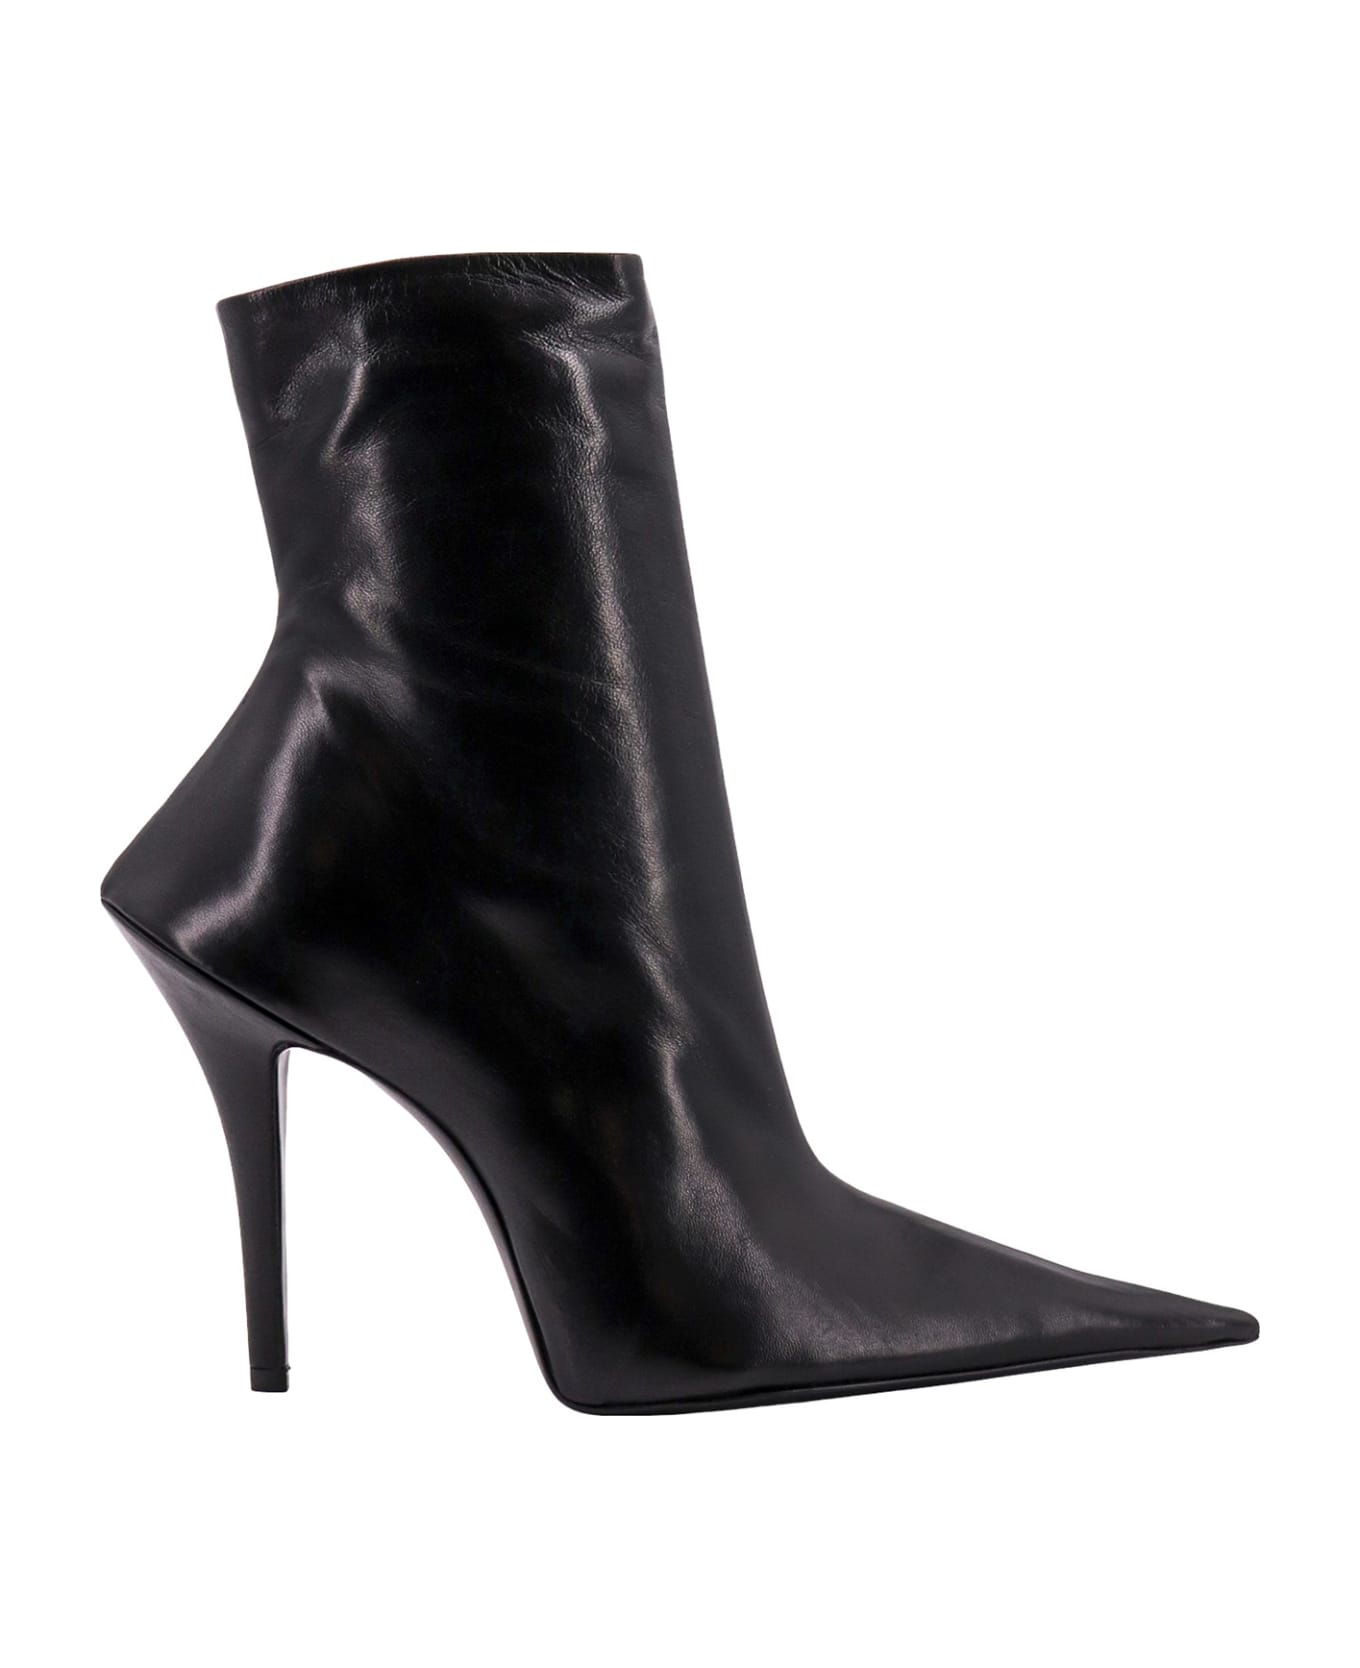 Balenciaga Witch Ankle Boots - Black ブーツ